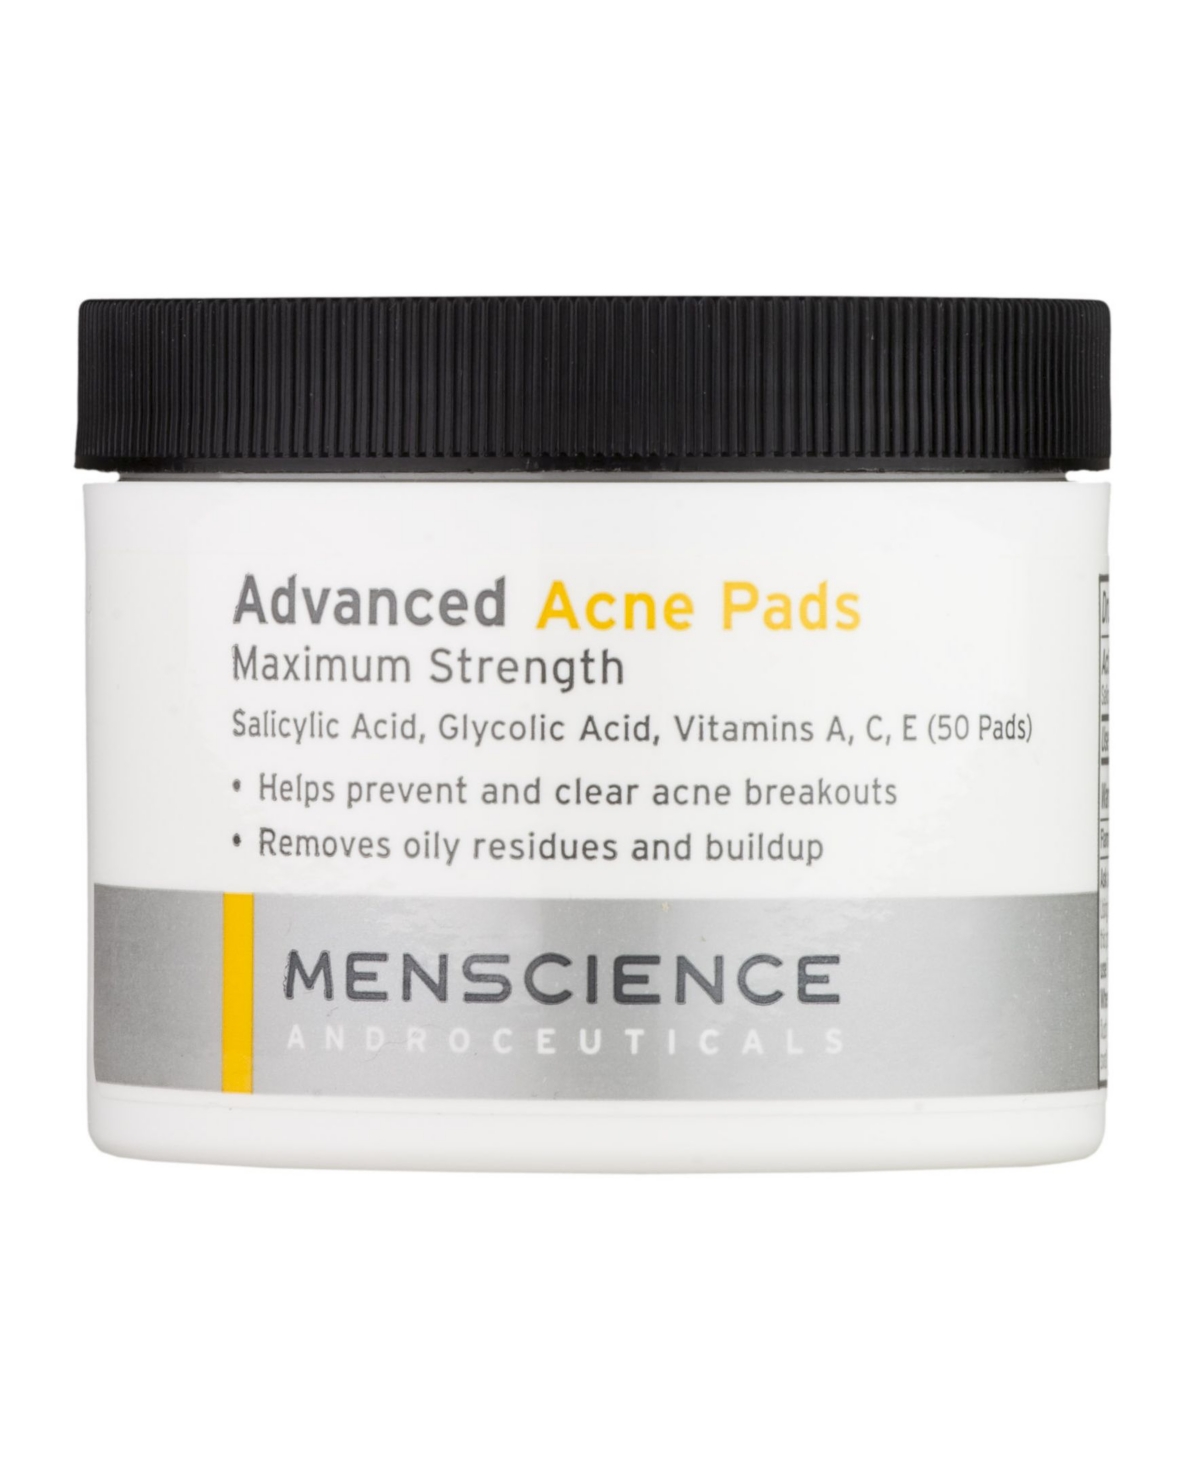 Advanced Acne Pads Face & Body For Men, 50 pads